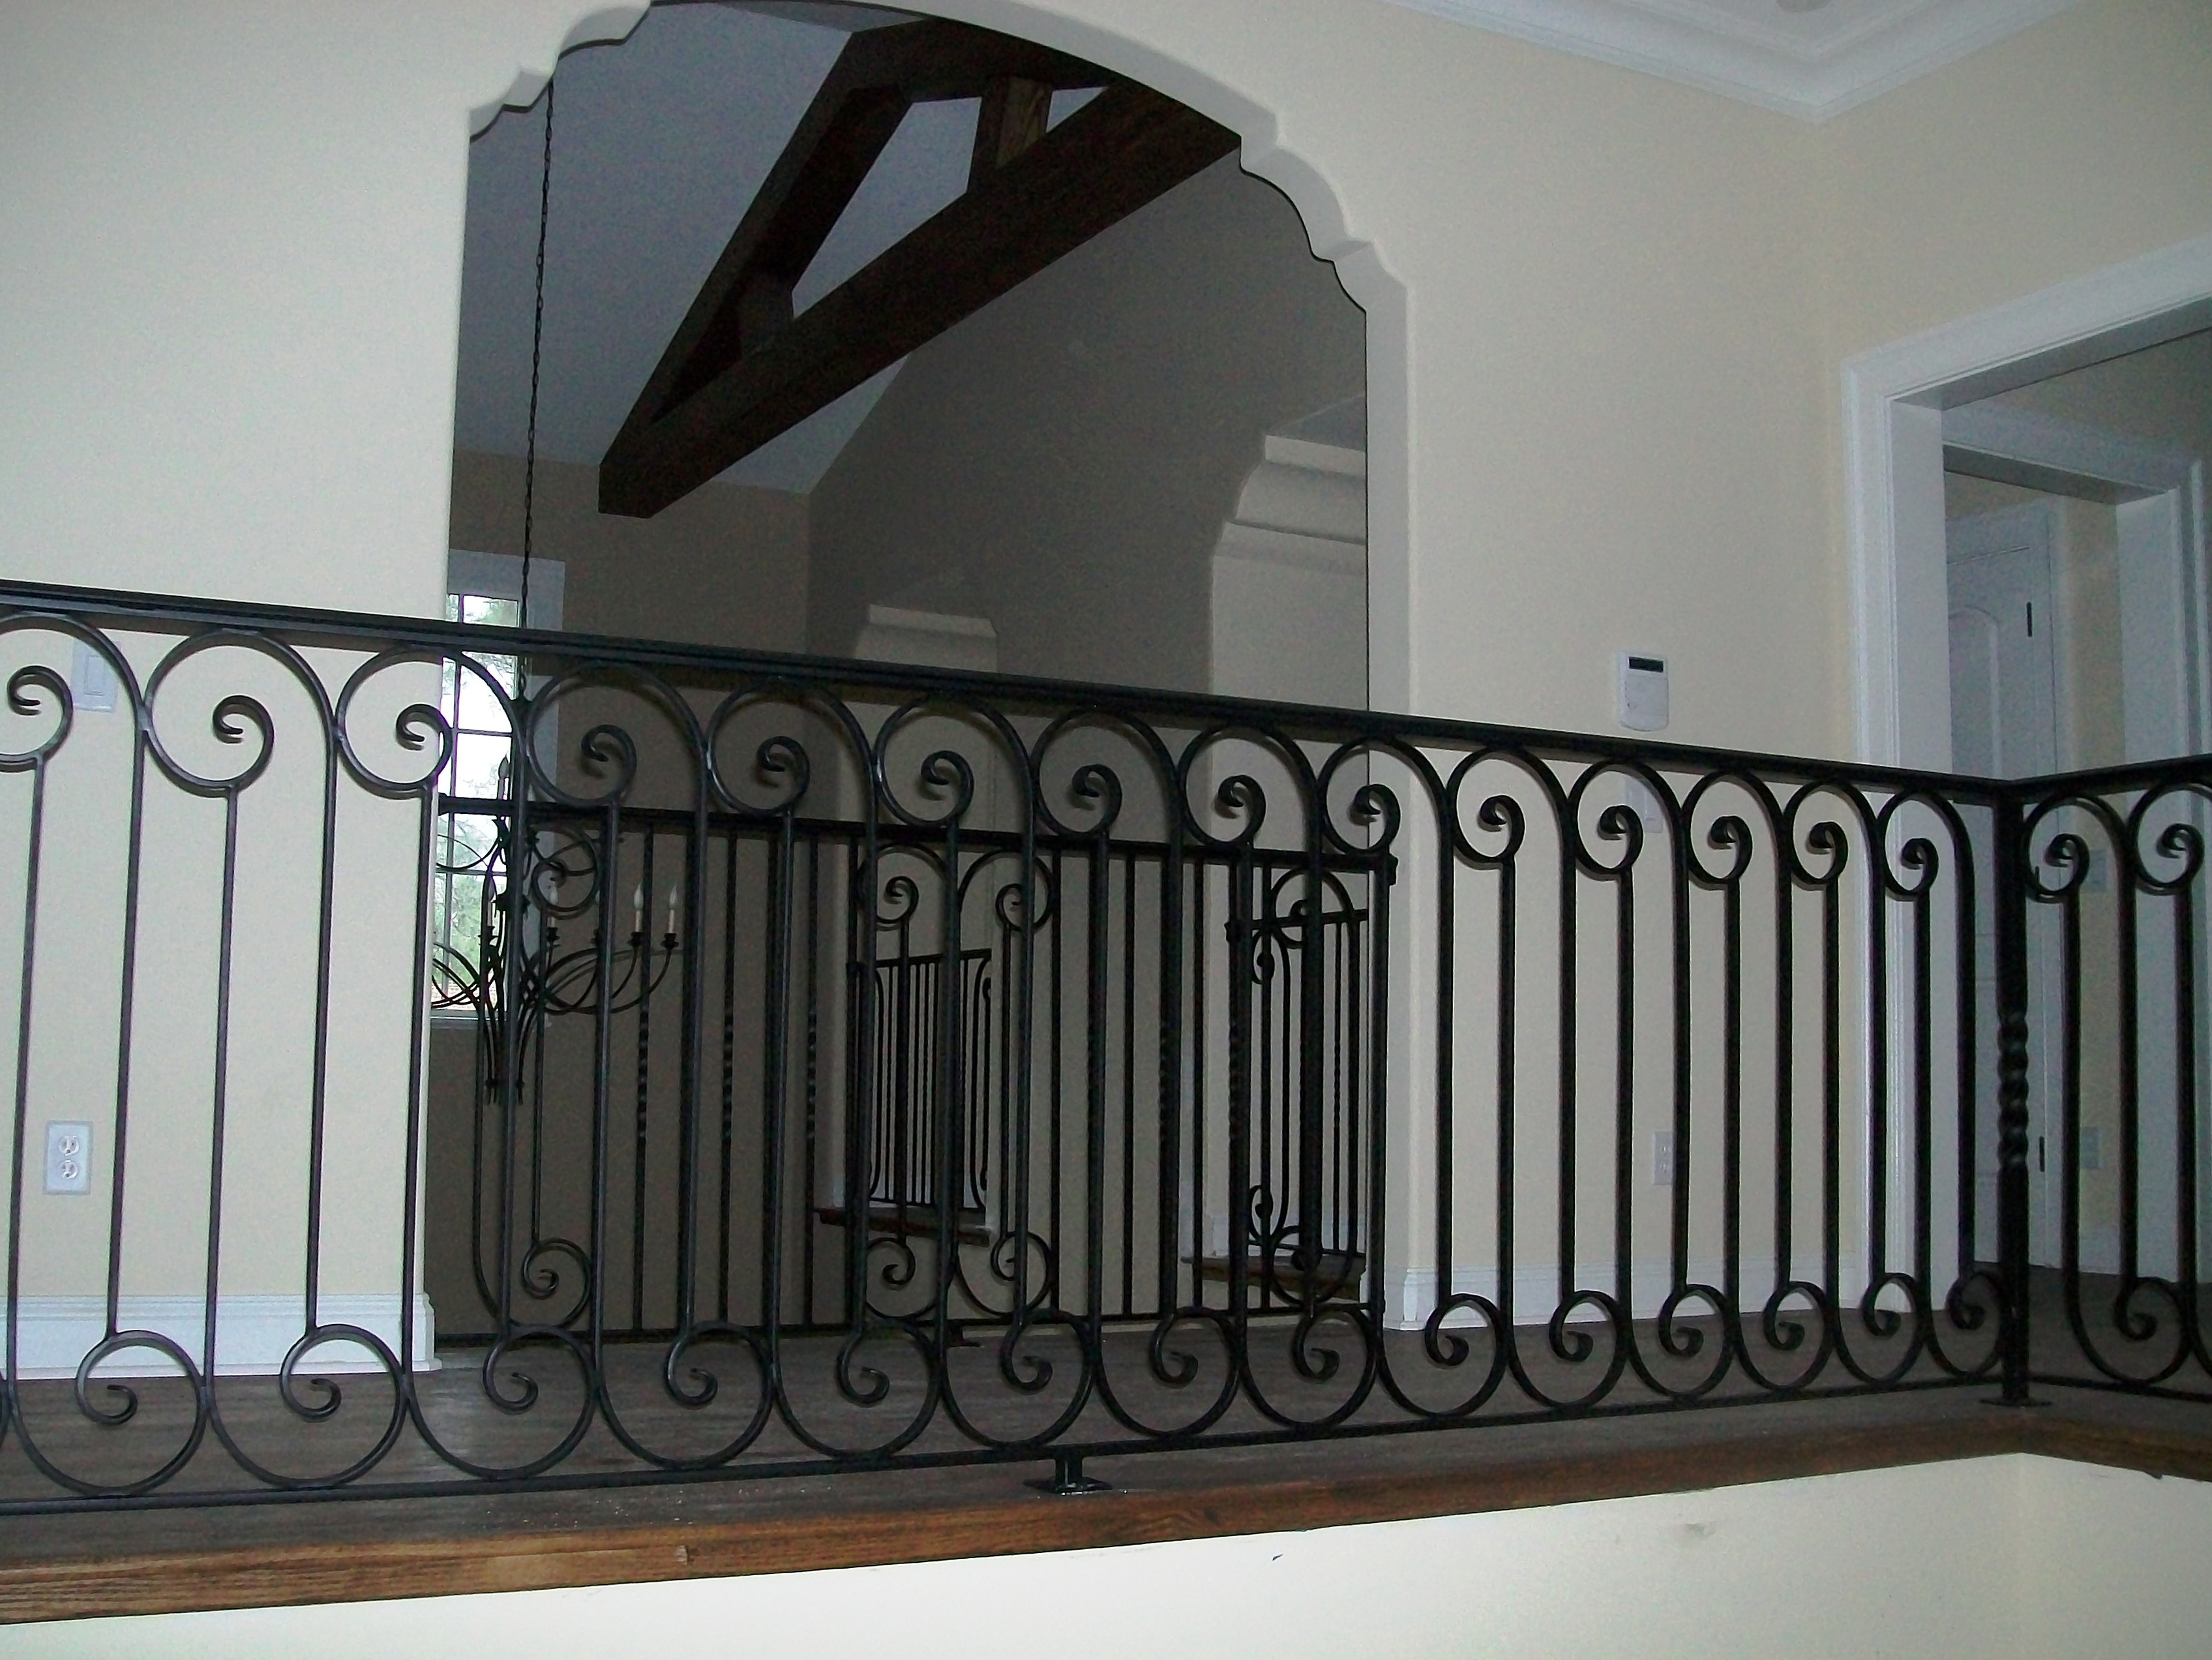 Wrought Iron Deck Railing Pictures | Home Design Ideas